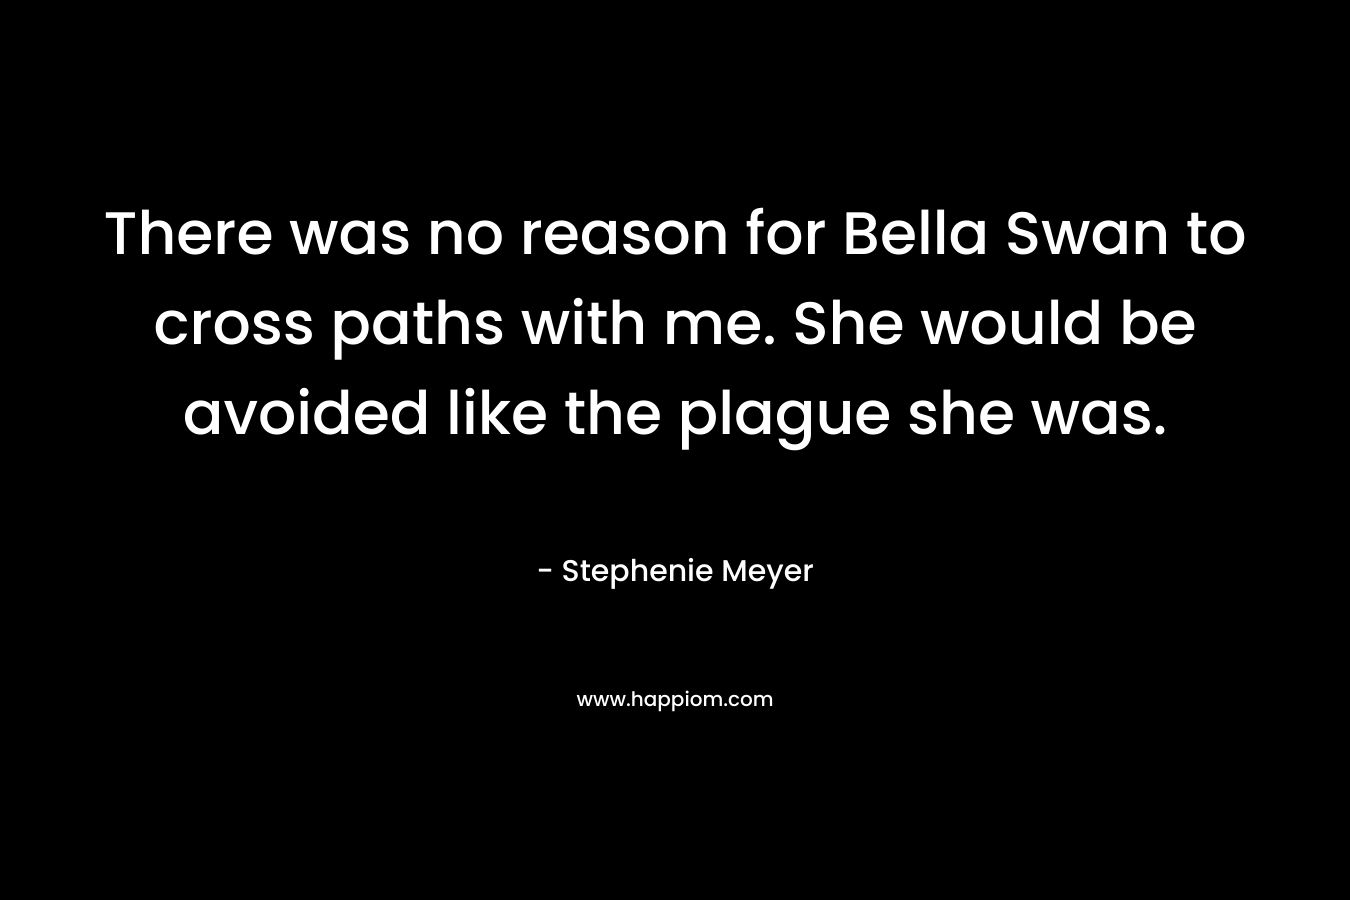 There was no reason for Bella Swan to cross paths with me. She would be avoided like the plague she was. – Stephenie Meyer